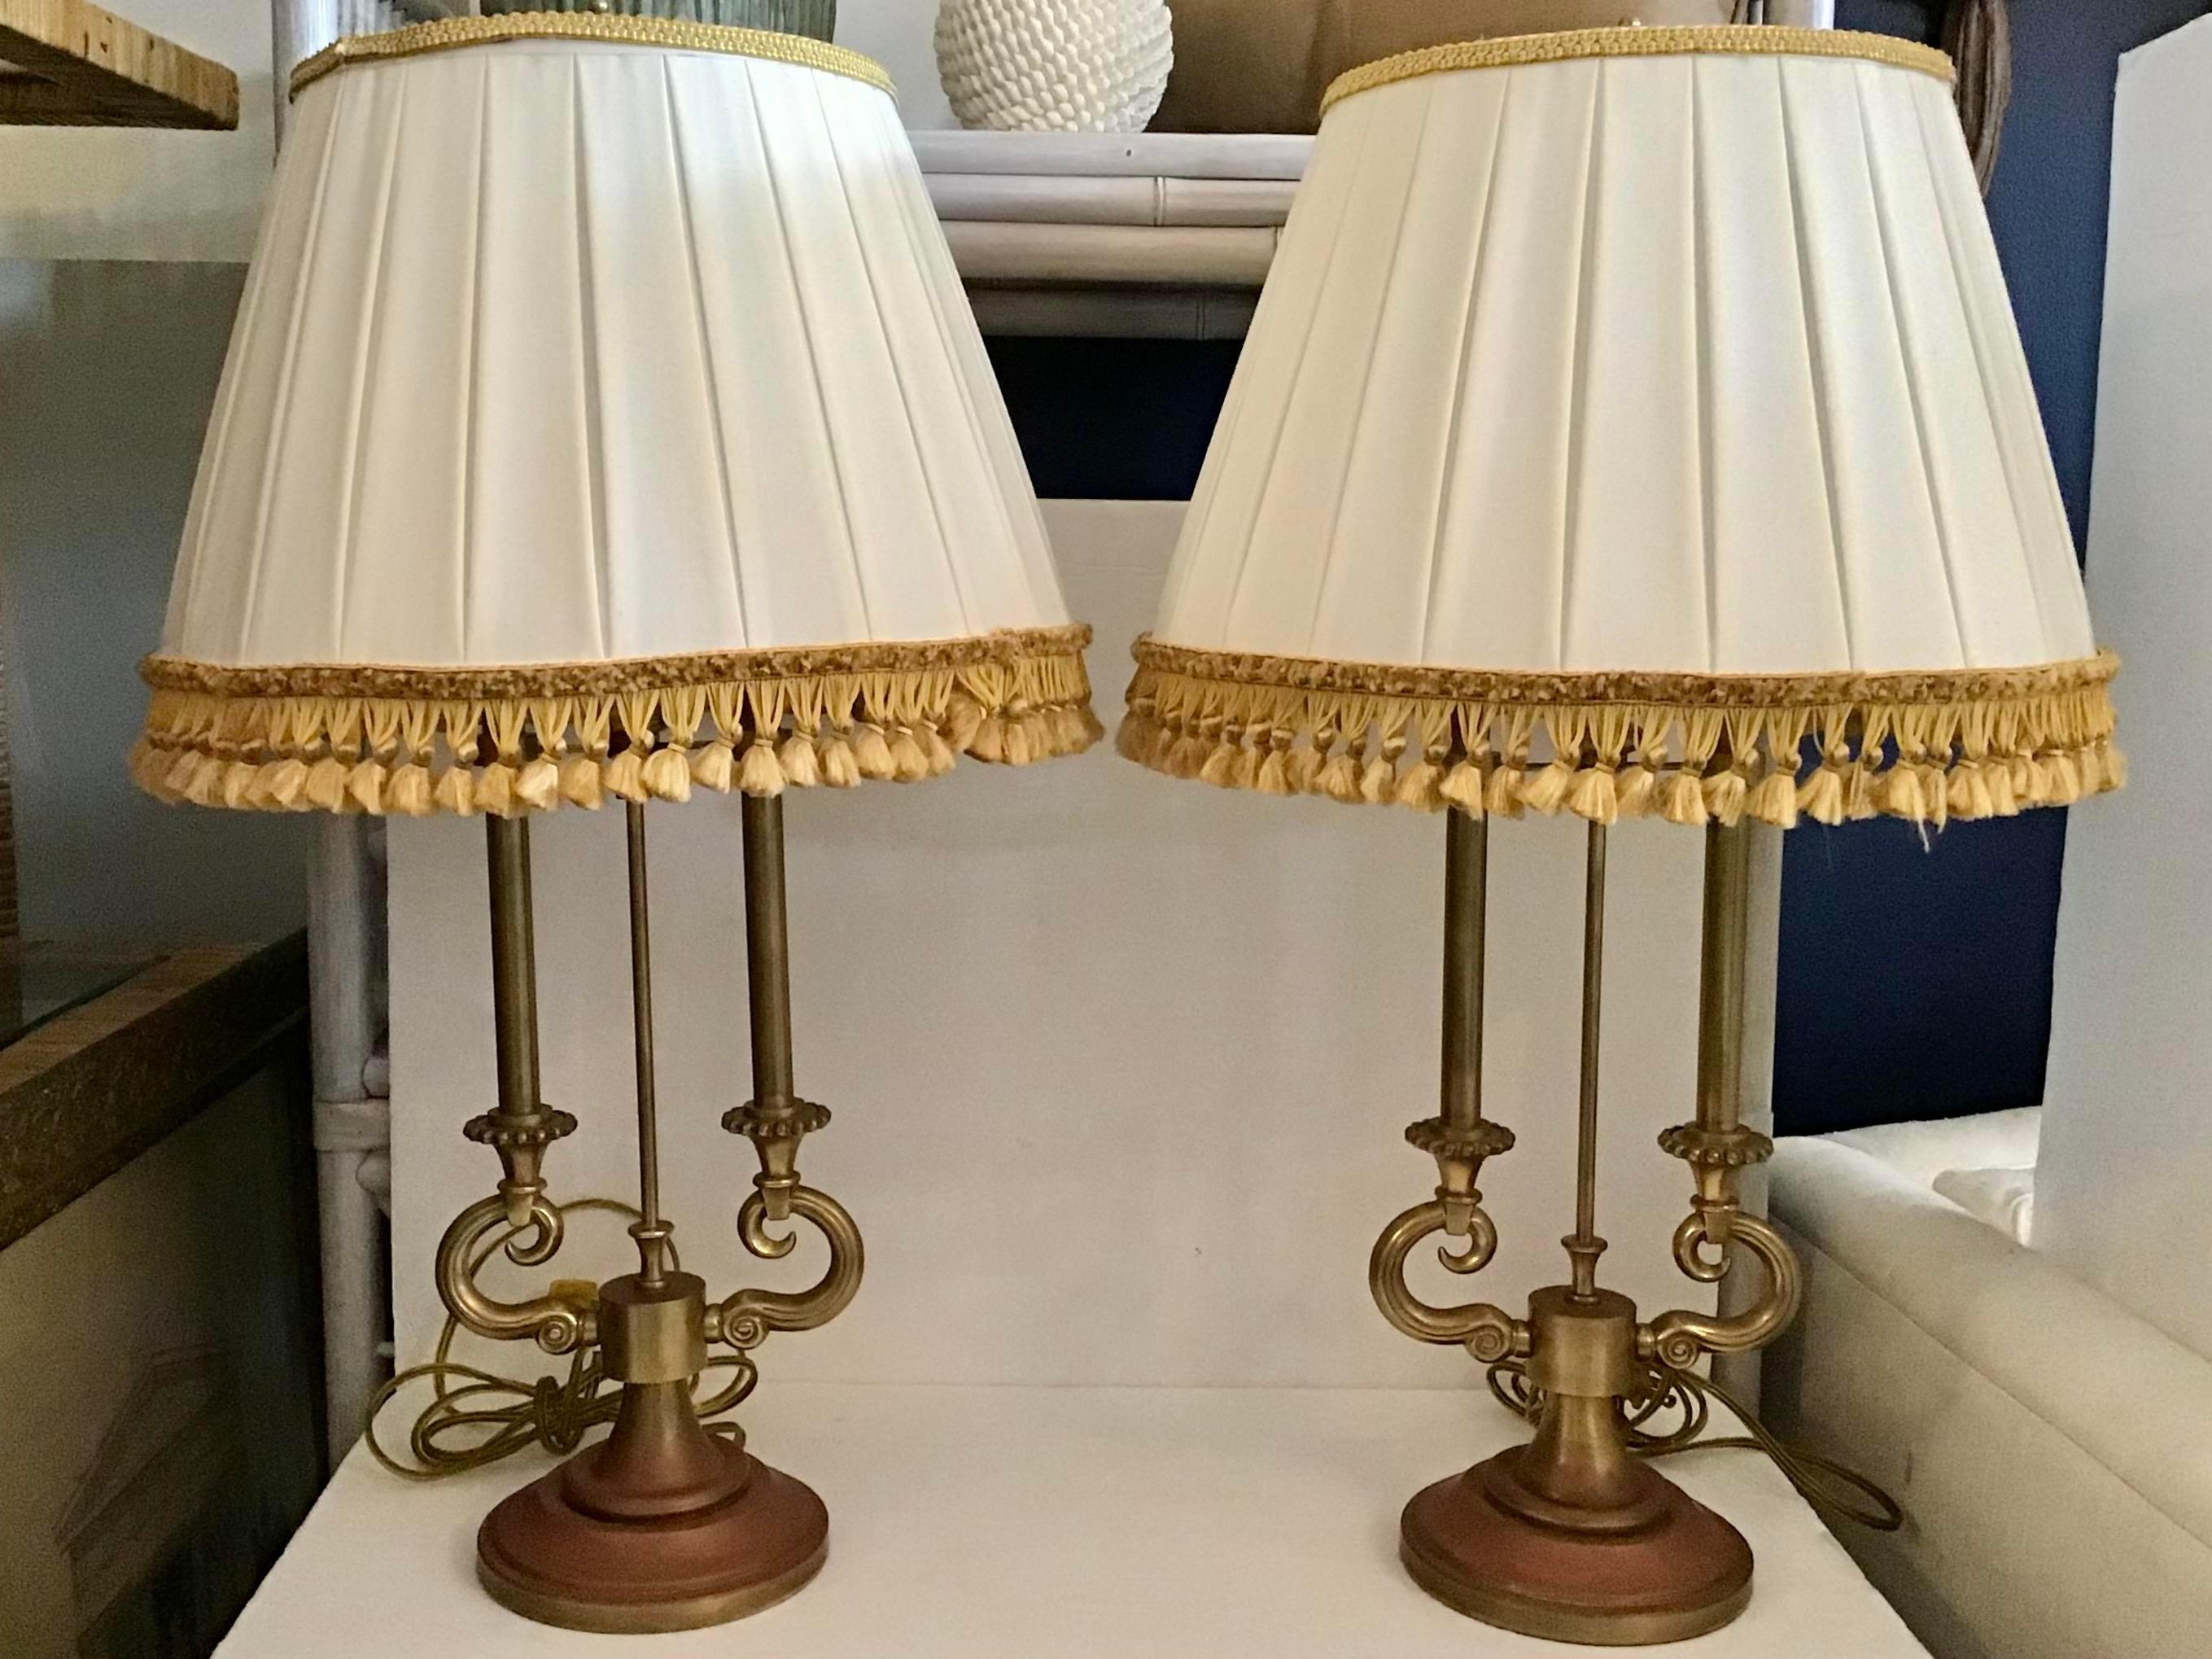 Original pair of Stiffel brass table lamps with Jansen shades with gold fringe. These gorgeous original Stiffel lamps are a warm worn brass. Notice the worn age on the bases addd real wrath to your interiors. The Jansen shades are very chic with the